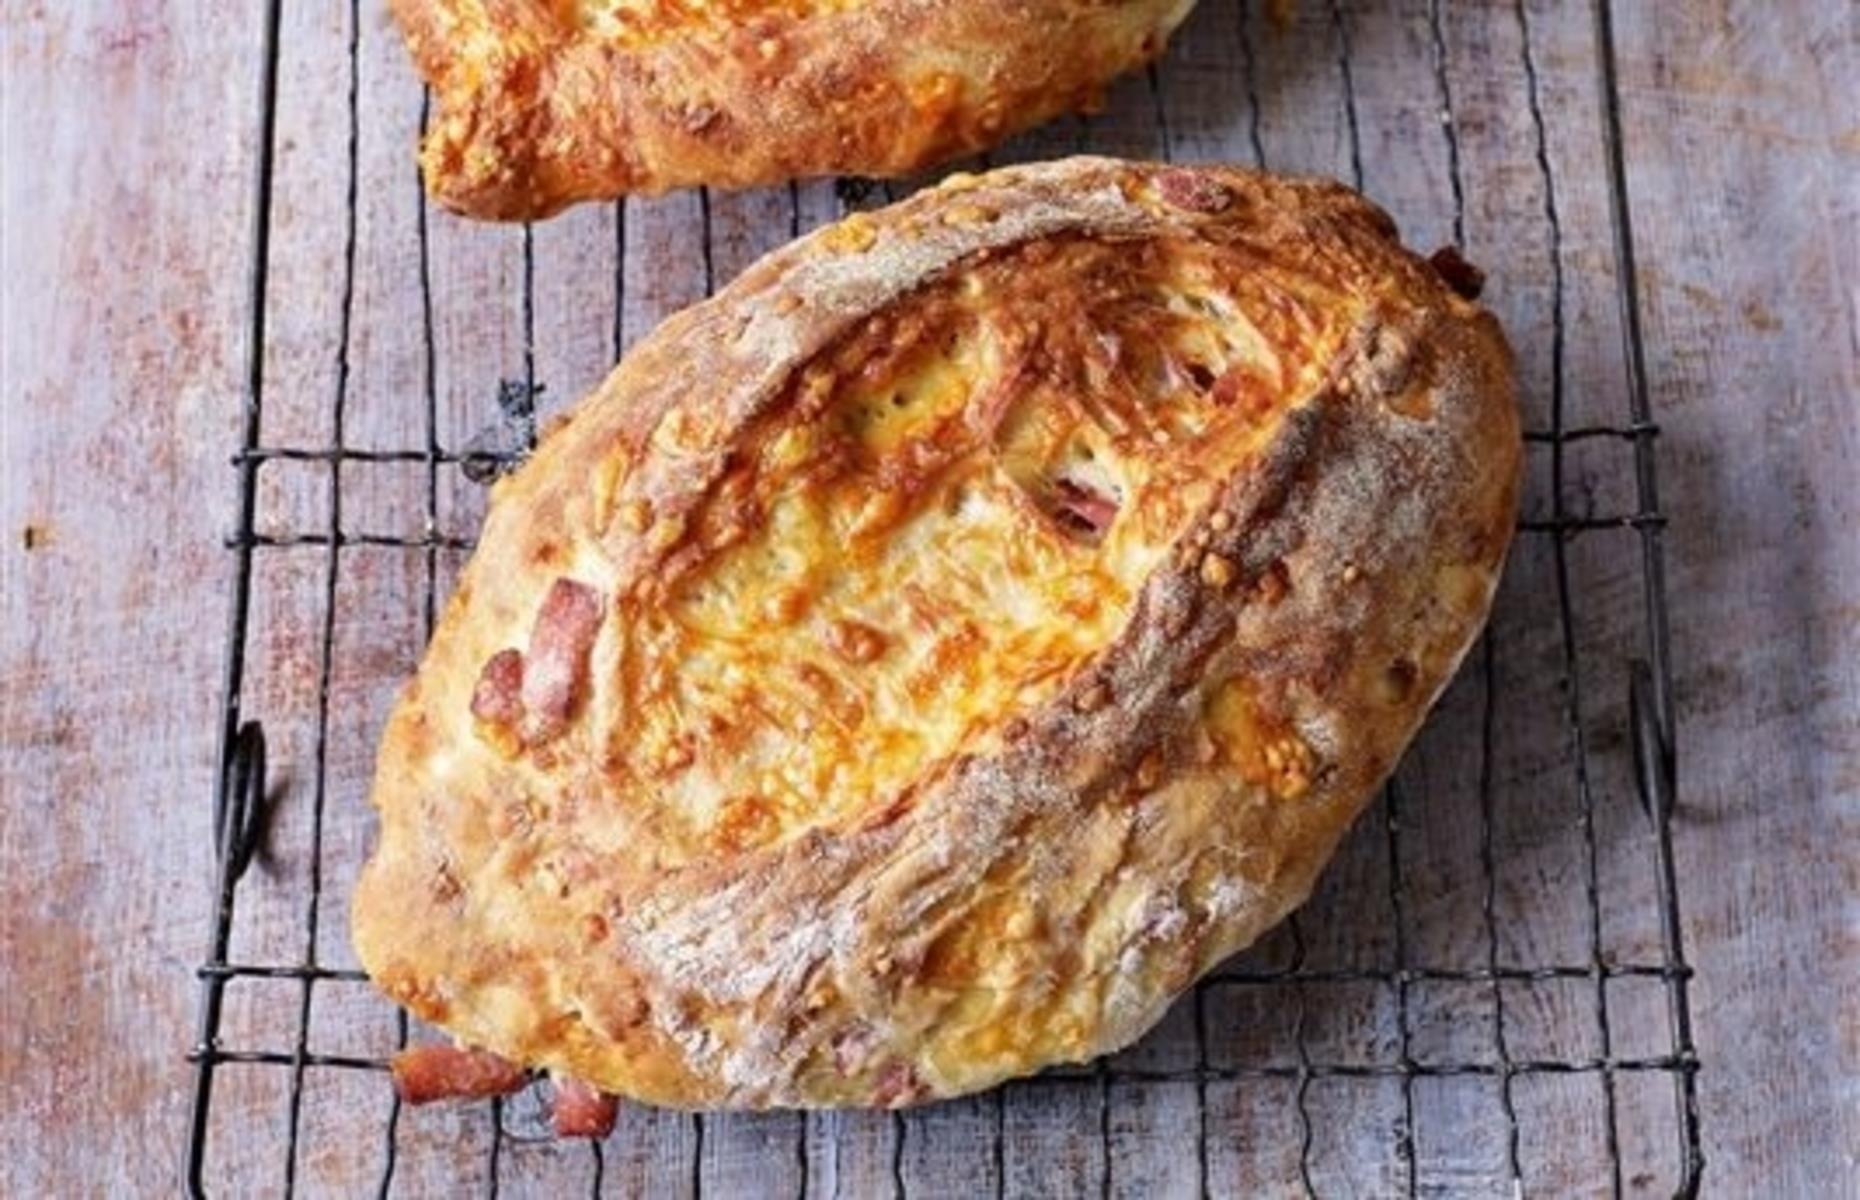 <p>This might be a straightforward-looking loaf, but the wow factor comes from its filling of smoked bacon and melted cheese. The recipe makes four small breads, so serve one warm and freeze the others for another day. Allow to thaw for an hour, then flash in a hot oven for five minutes to heat through.</p>  <p><a href="https://www.lovefood.com/recipes/59672/bacon-and-cheddar-loaves-recipe"><strong>Get the recipe for bacon and Cheddar loaves here</strong></a></p>